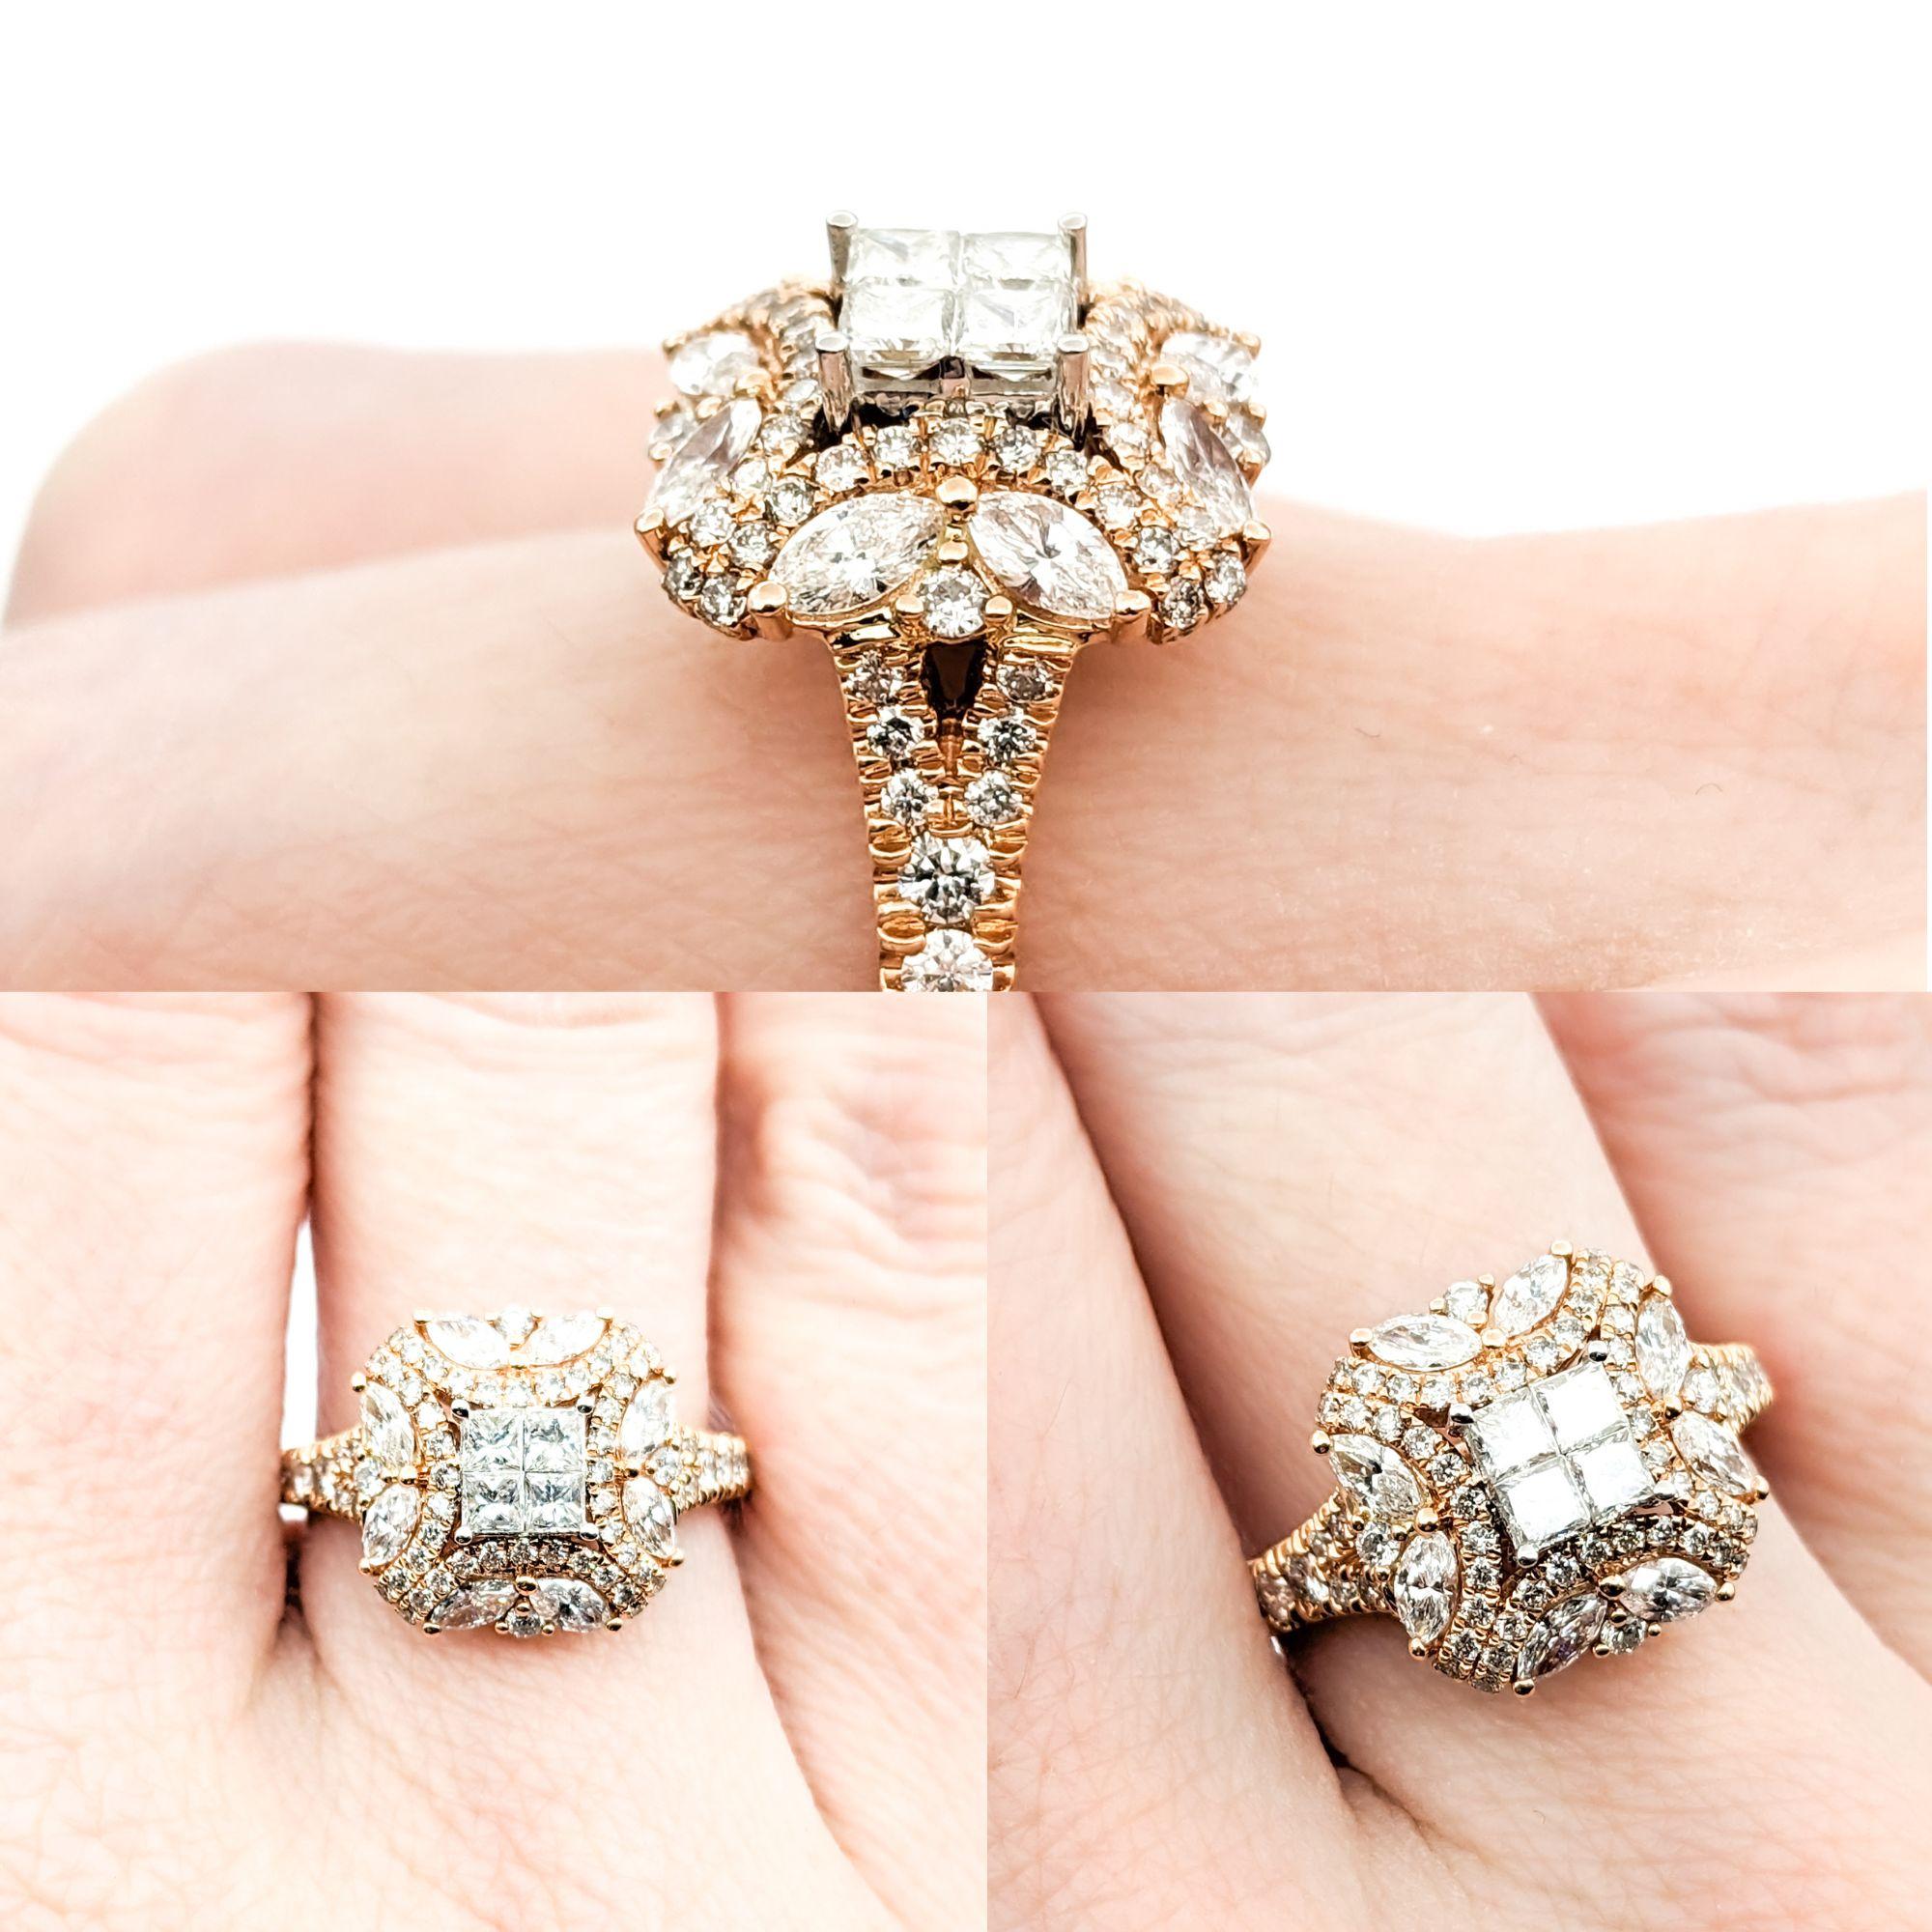 1.28ctw Diamond Illusion Cluster Ring In Rose Gold

This stunning Diamond Fashion Ring, exquisitely crafted in 14kt rose gold, dazzles with 1.28ctw of diamonds arranged in an enchanting illusion cluster setting. The diamonds, boasting SI clarity and